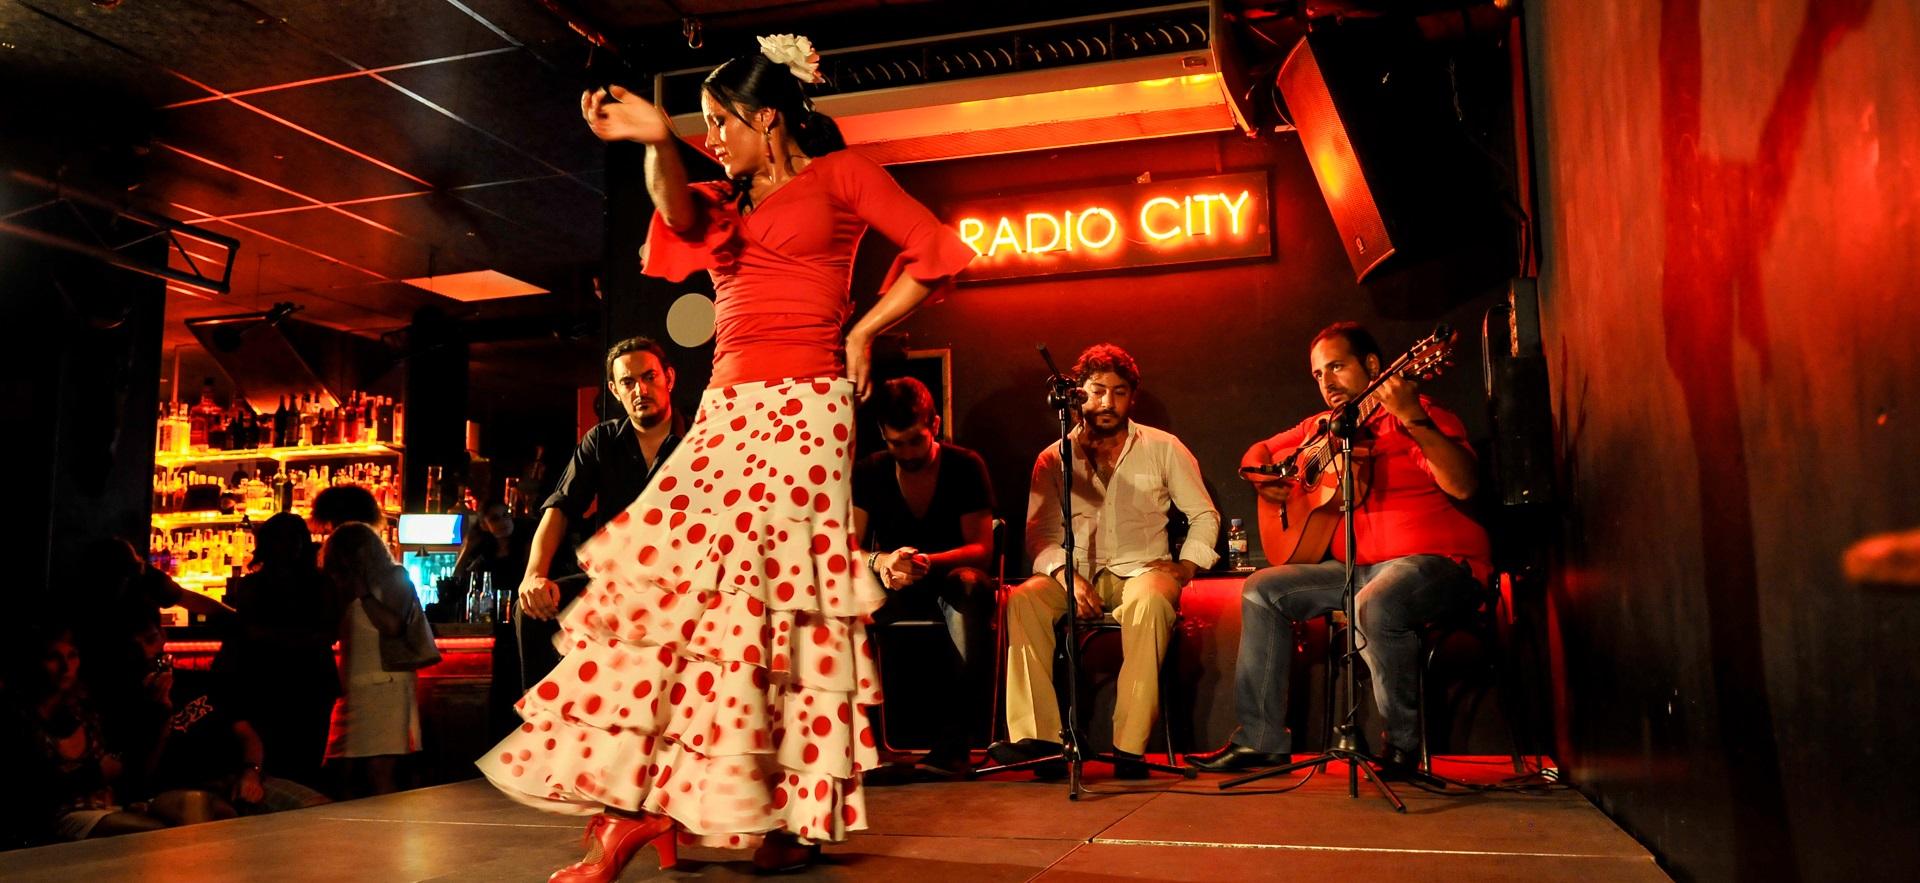 Jess' photo of a flamenco dancer on stage with musicians